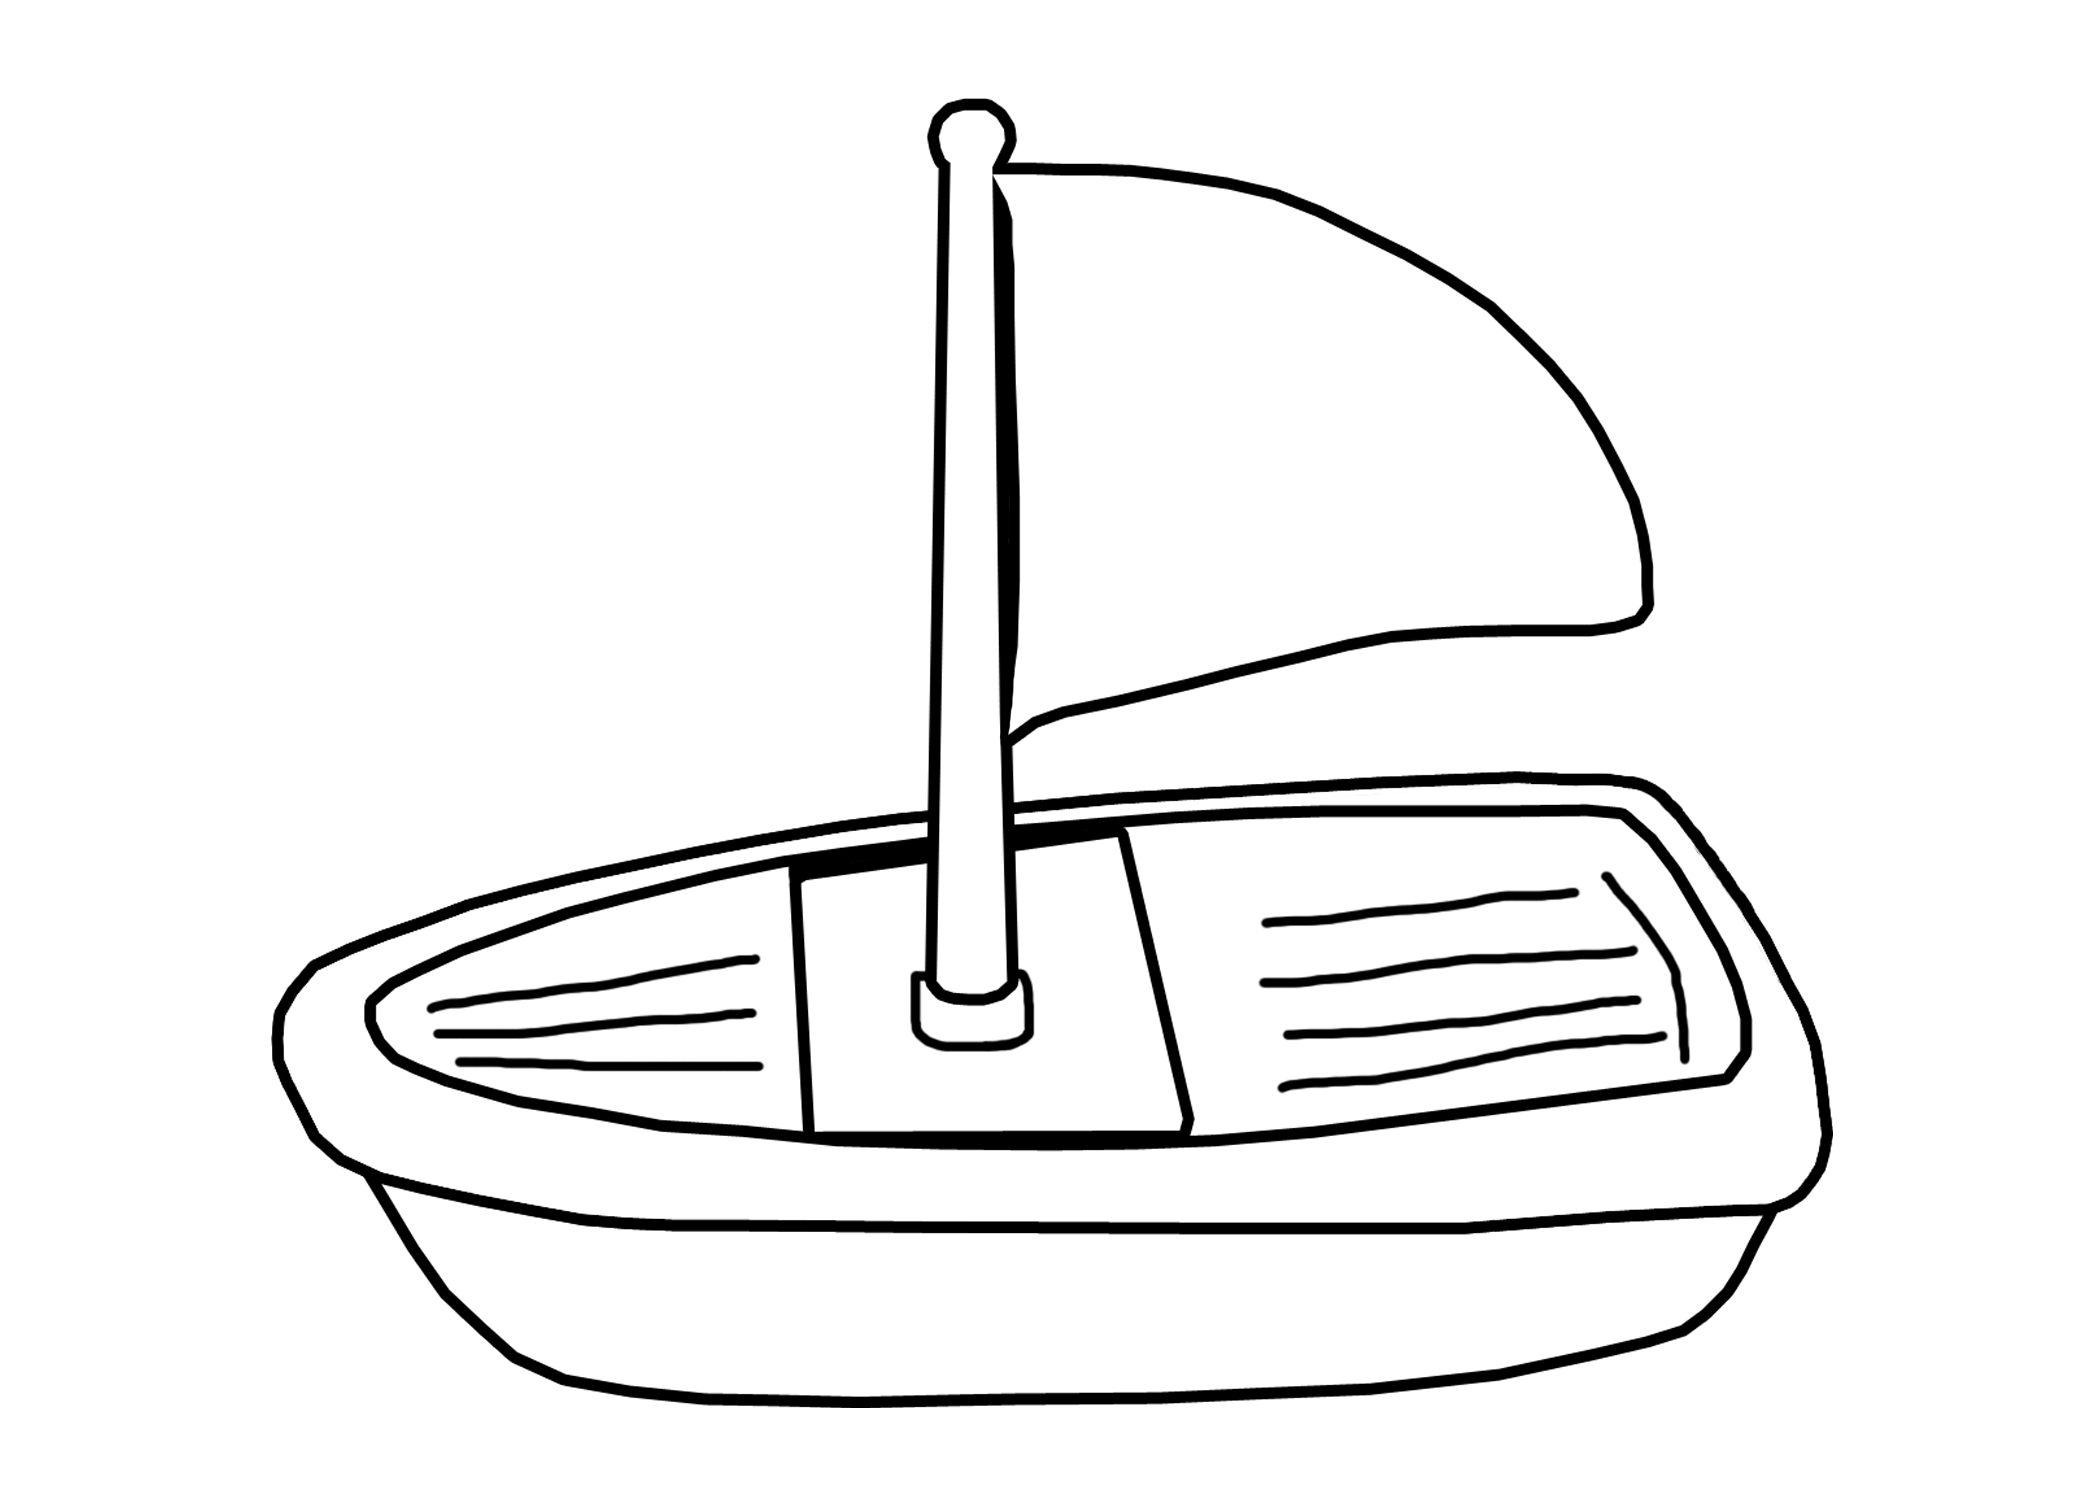 Coloring: Boat Coloring